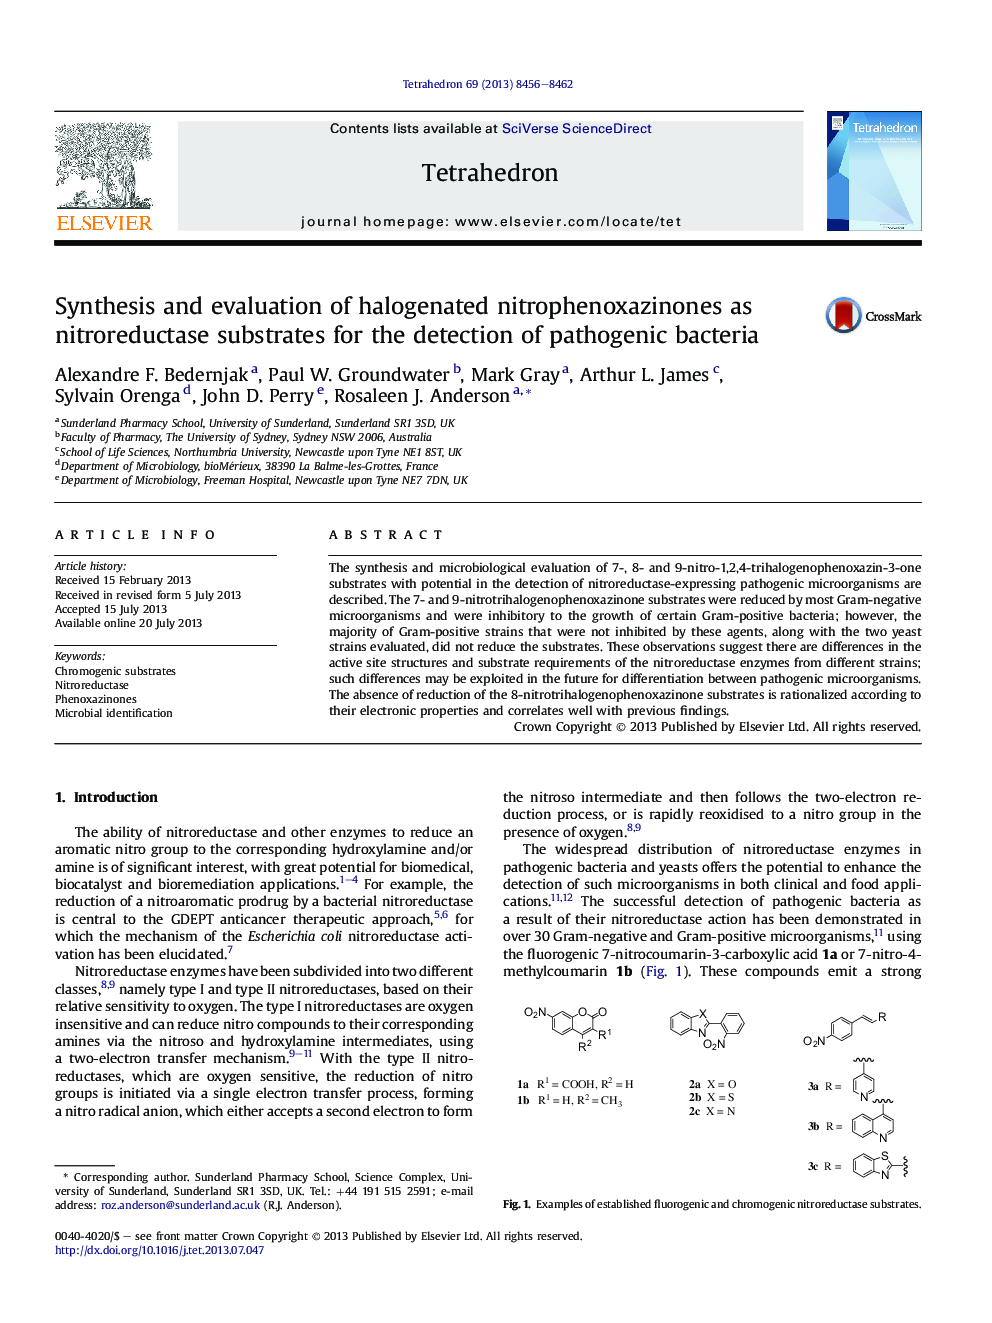 Synthesis and evaluation of halogenated nitrophenoxazinones as nitroreductase substrates for the detection of pathogenic bacteria